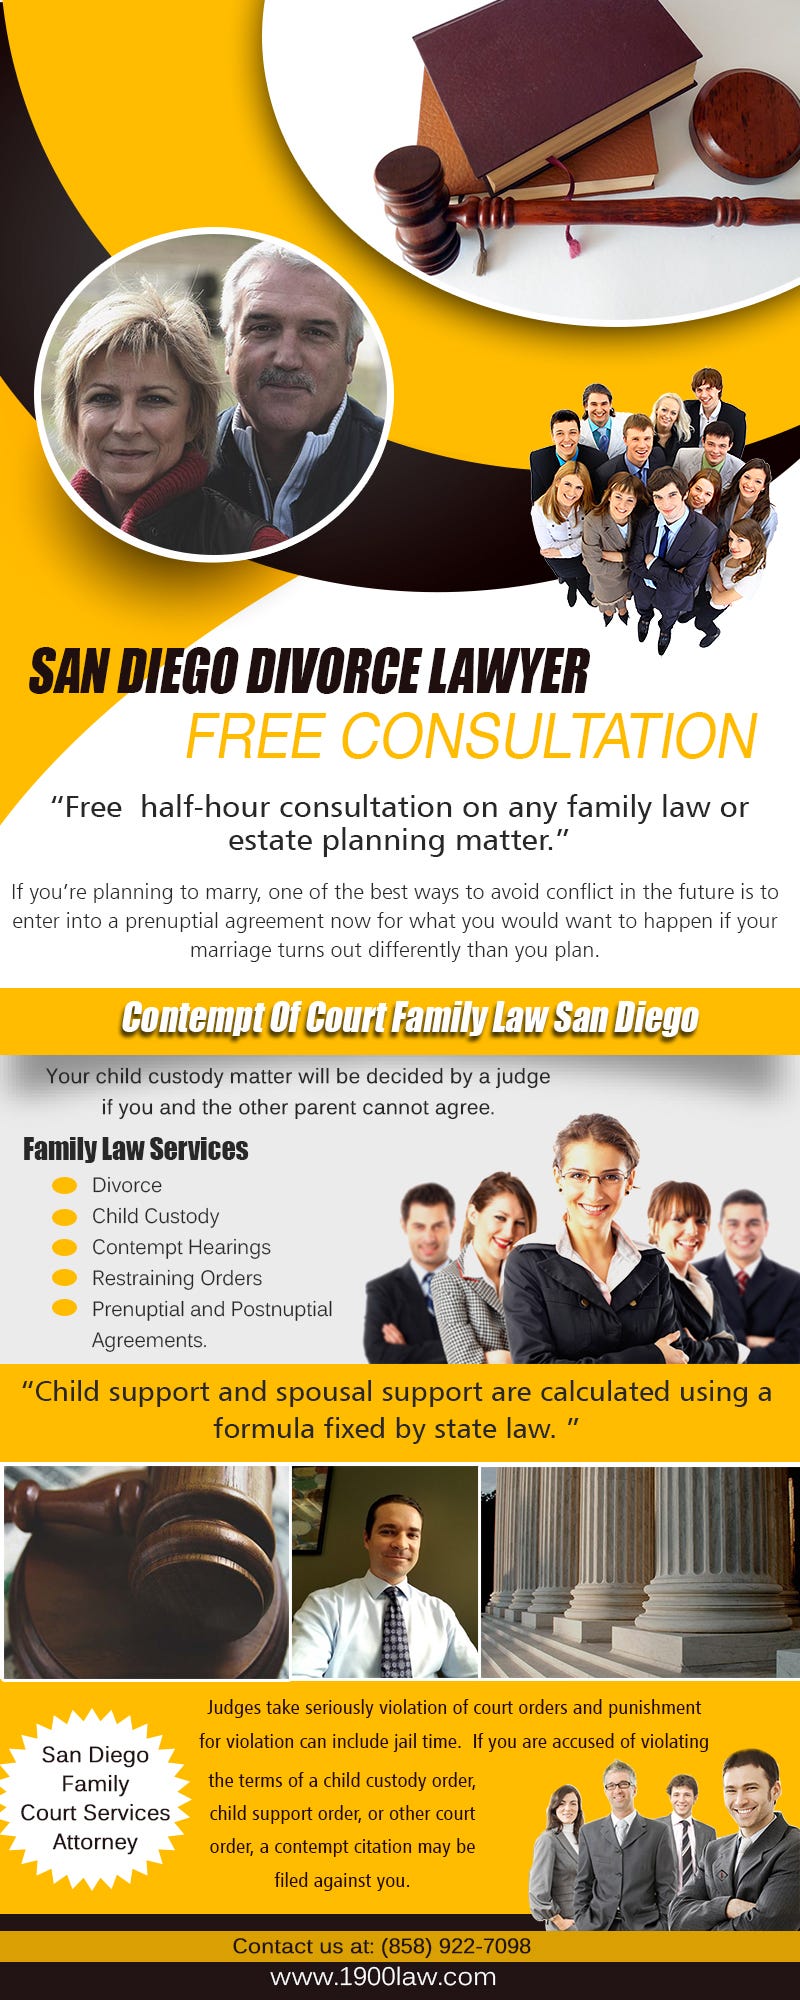 Top 5 Questions You Should Ask During Free Consultation By Cadivorcelawyer Medium